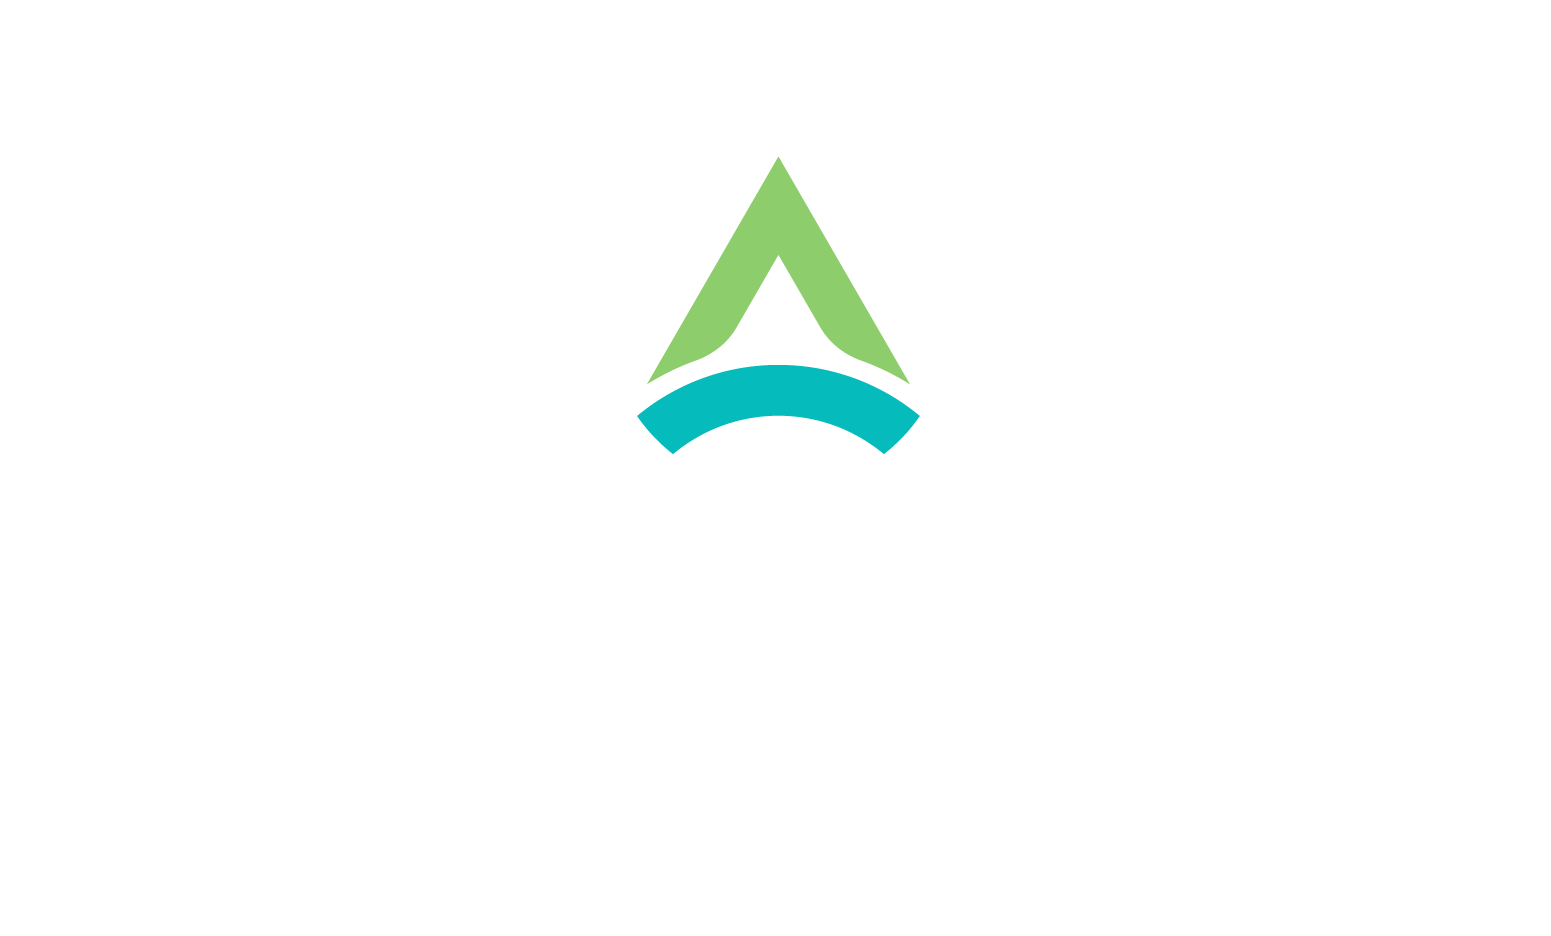 Affluent Bridge - Connecting You to Ideal Audiences